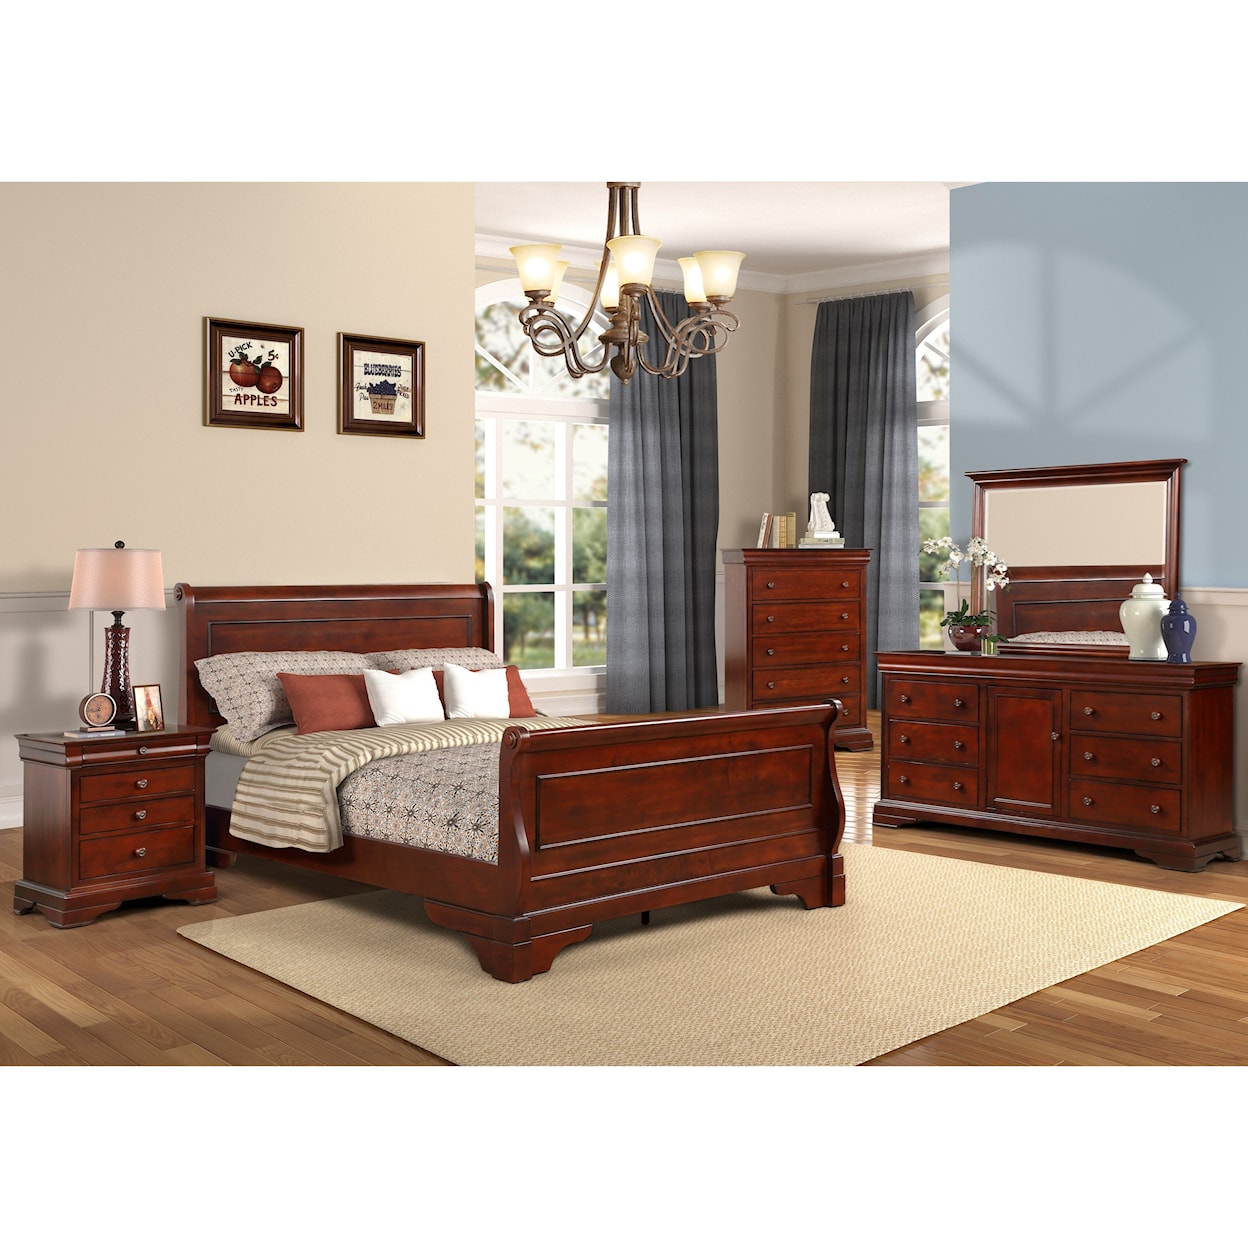 New Classic Furniture Versaille Full Bedroom Group